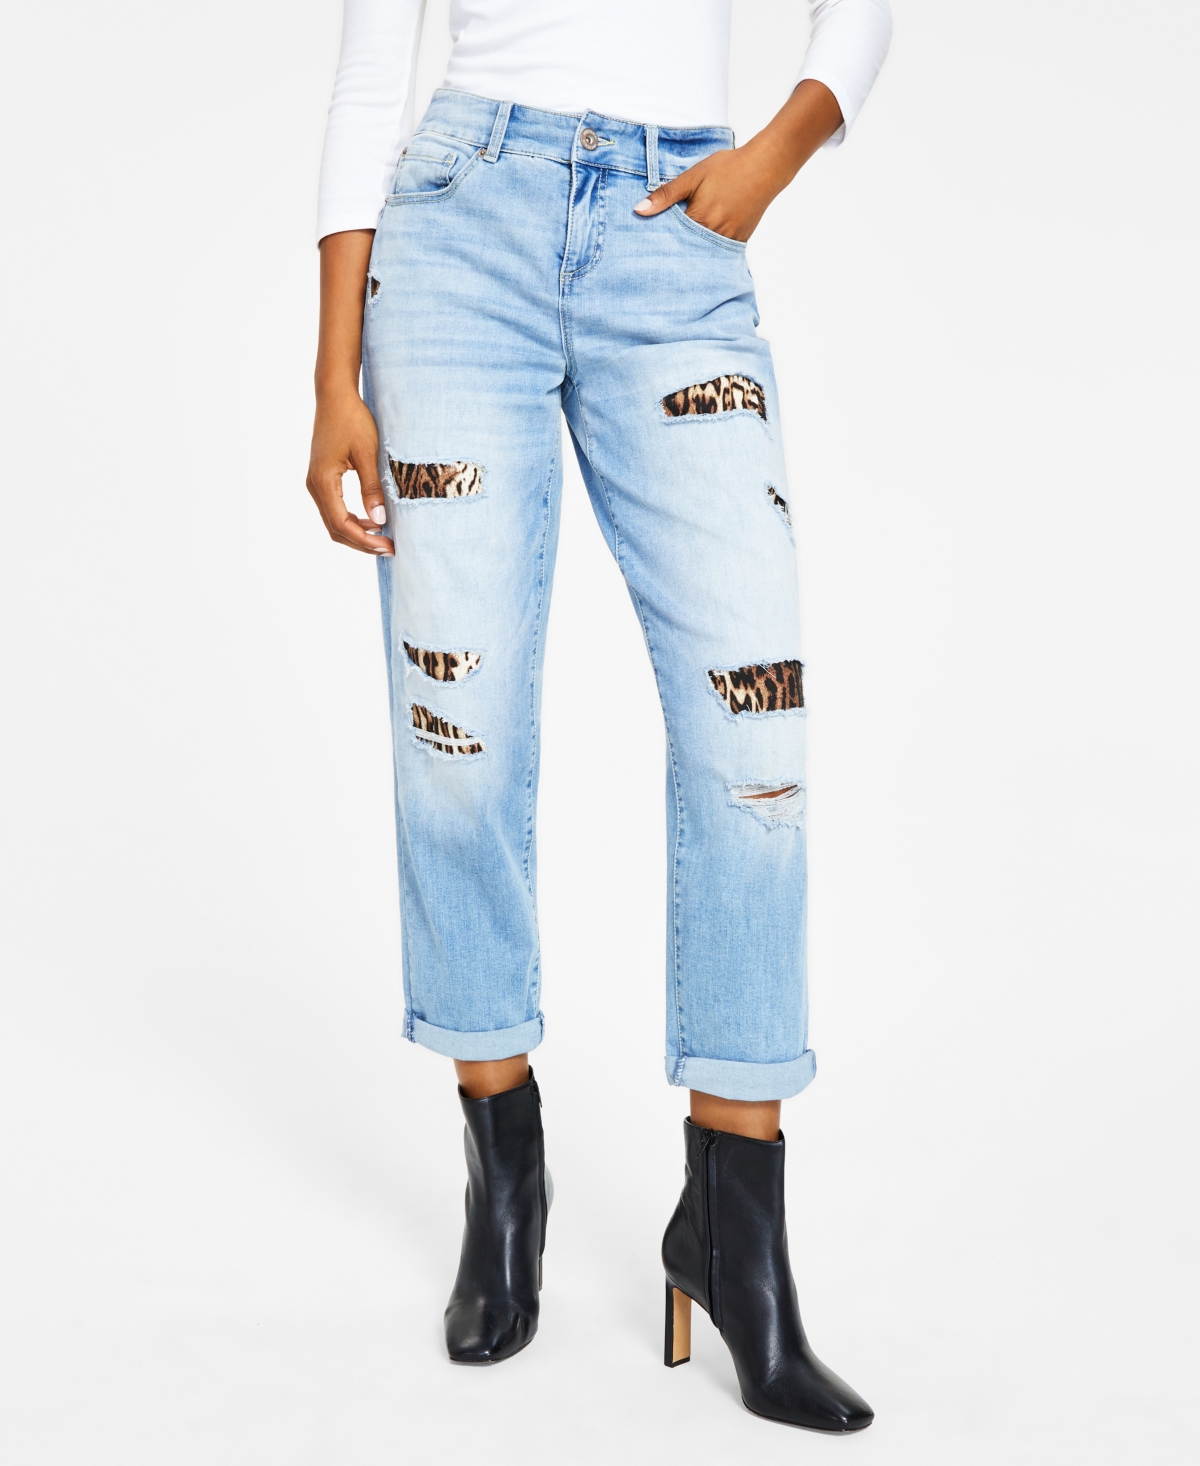  Inc International Concepts Women's High Rise Ripped Leopard Boyfriend Jeans, Regular & Petite, Created for Macy's